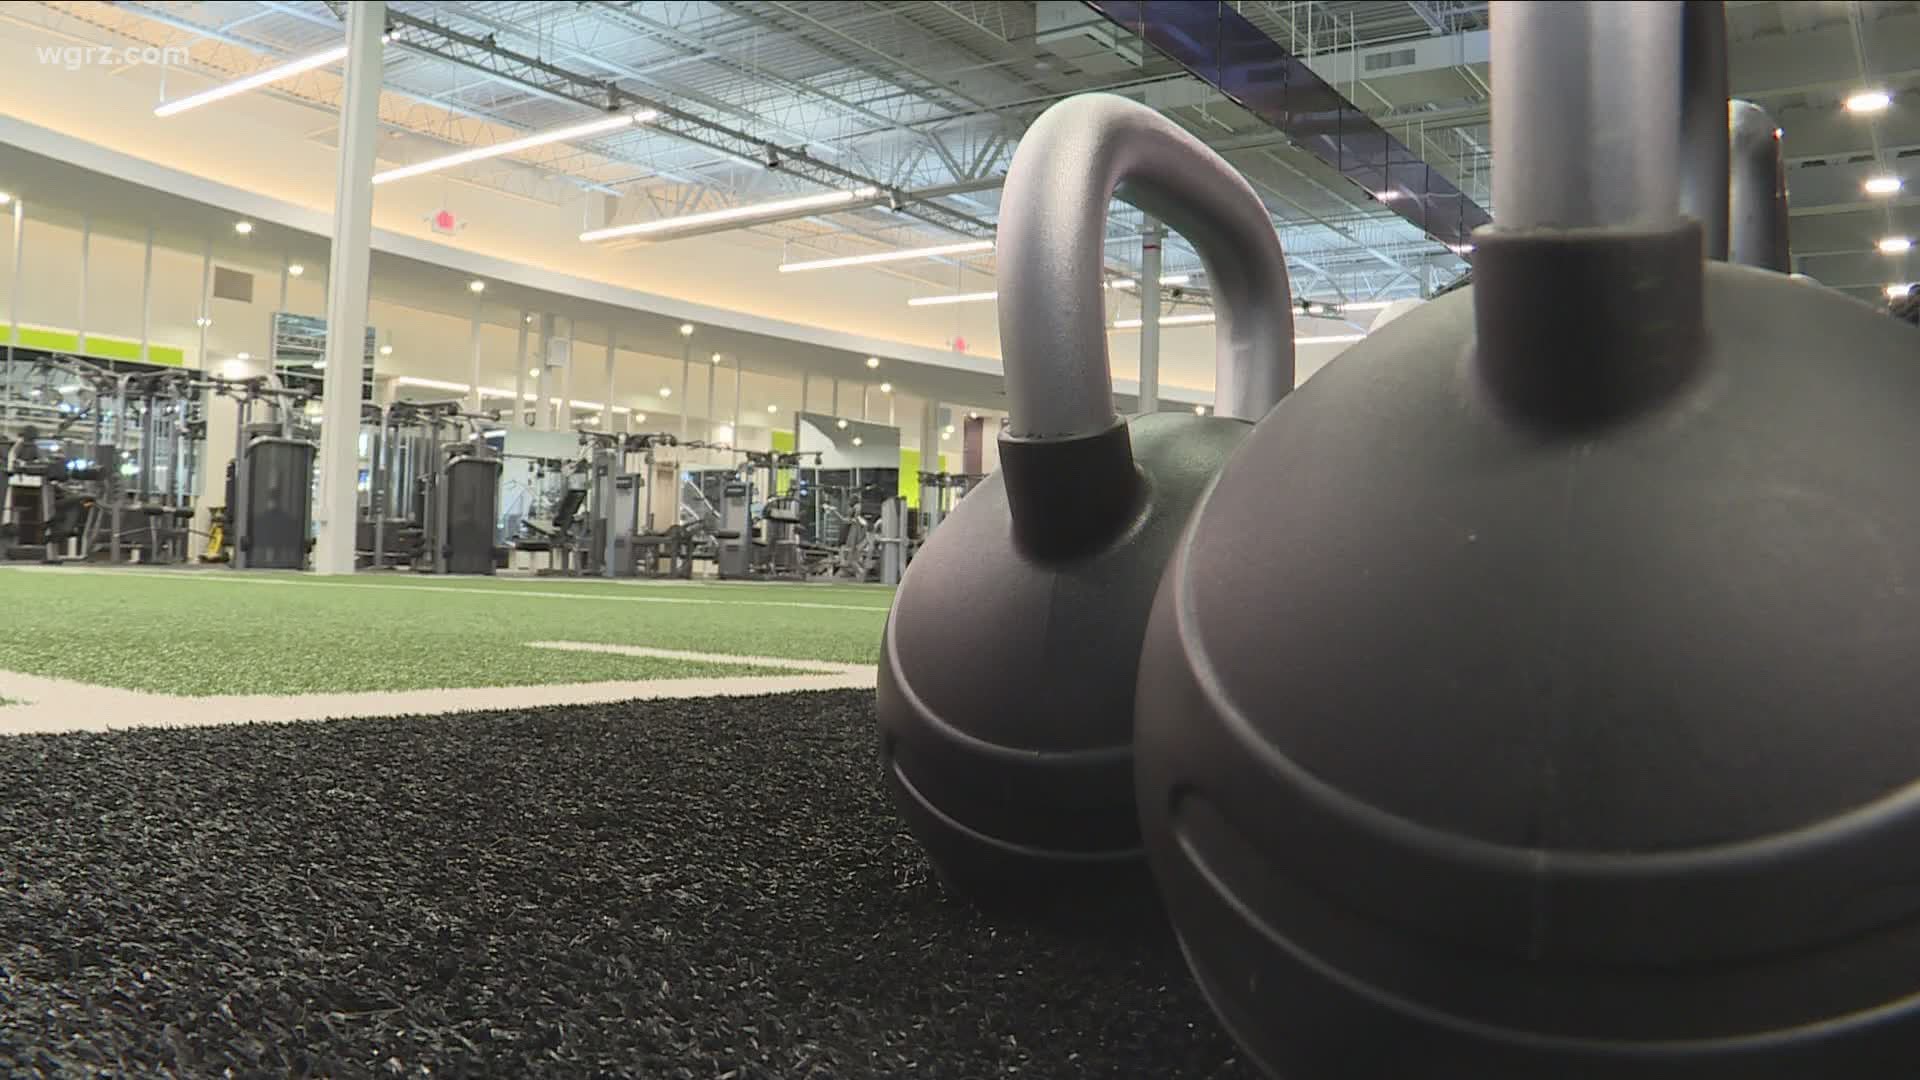 Catalyst Fitness will host a rally at its Maple Road location in Amherst on Thursday, calling on Gov. Cuomo to allow fitness centers to reopen.